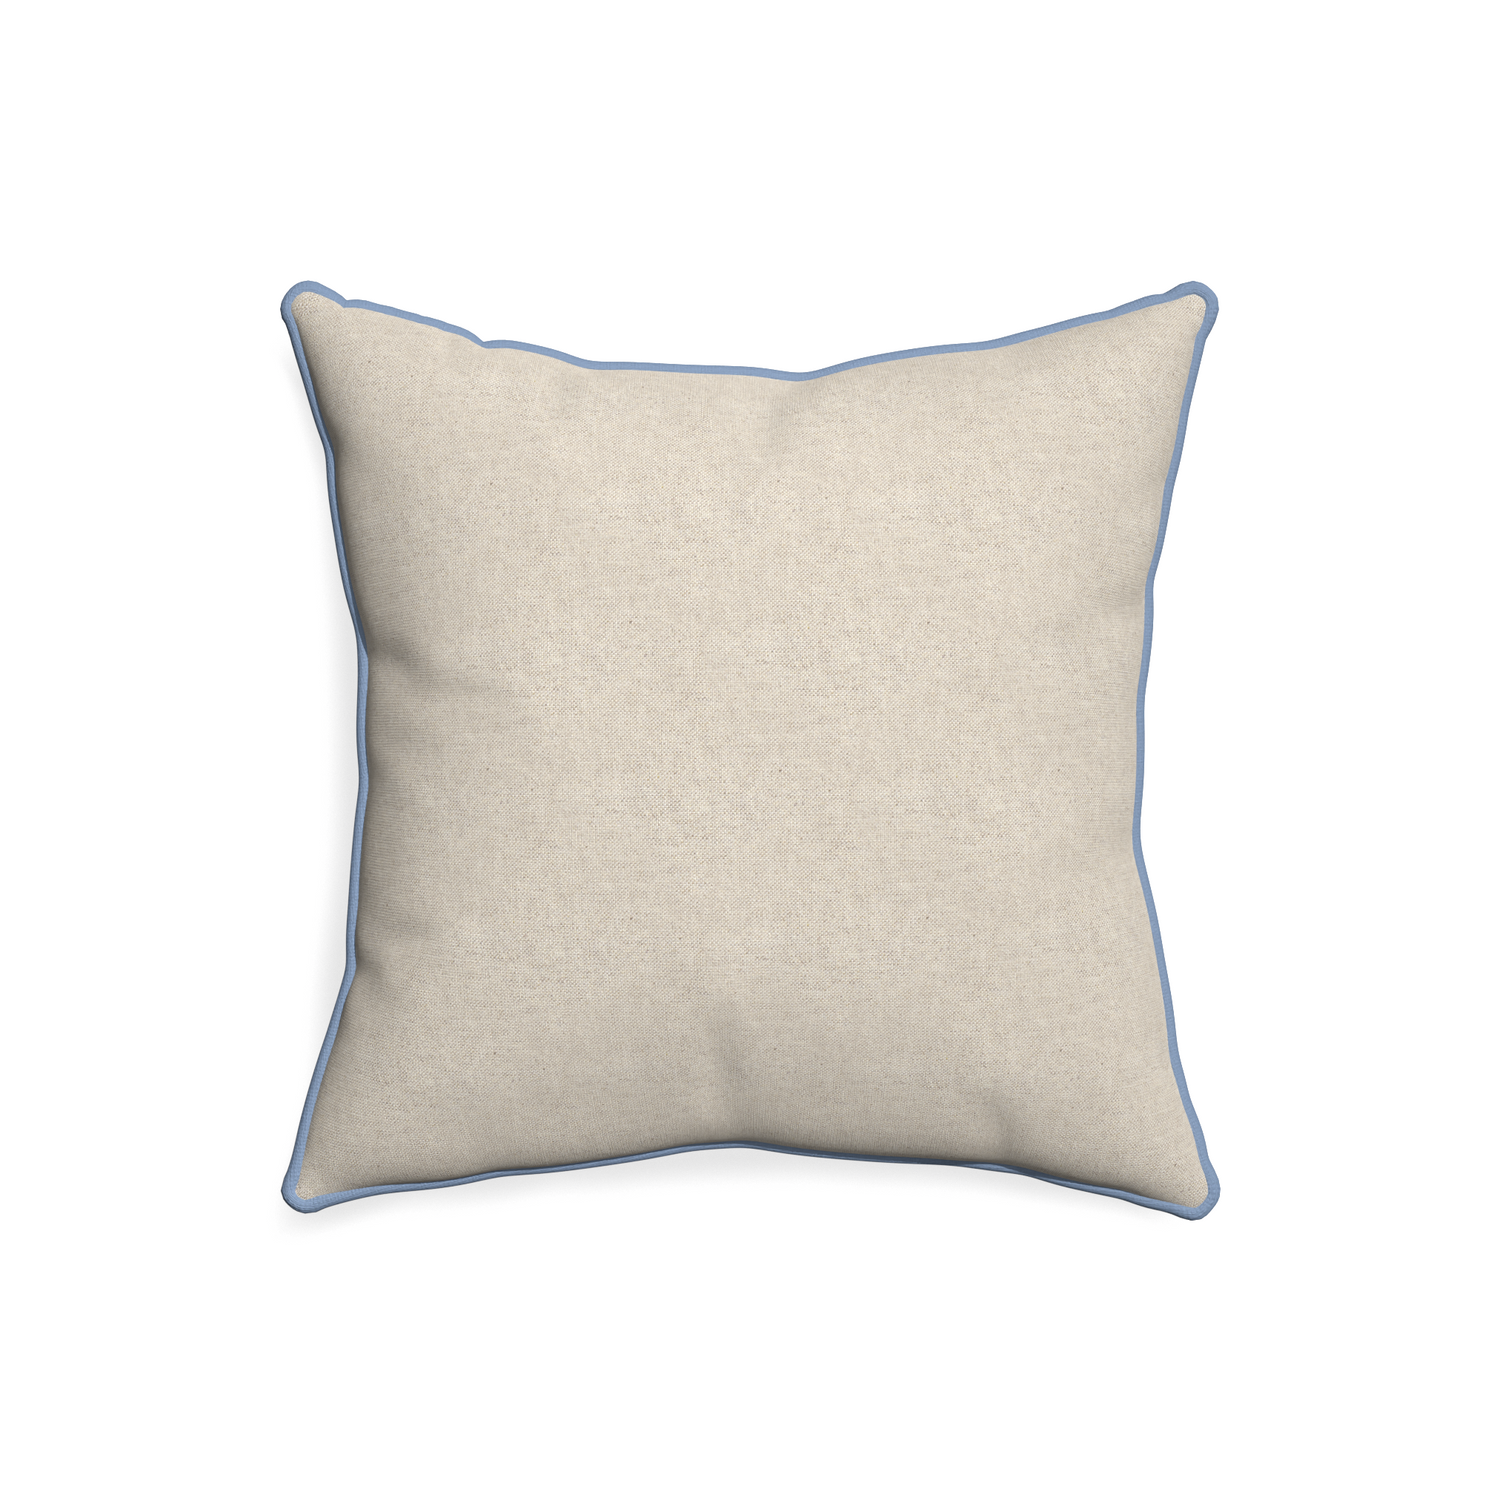 20-square oat custom pillow with sky piping on white background